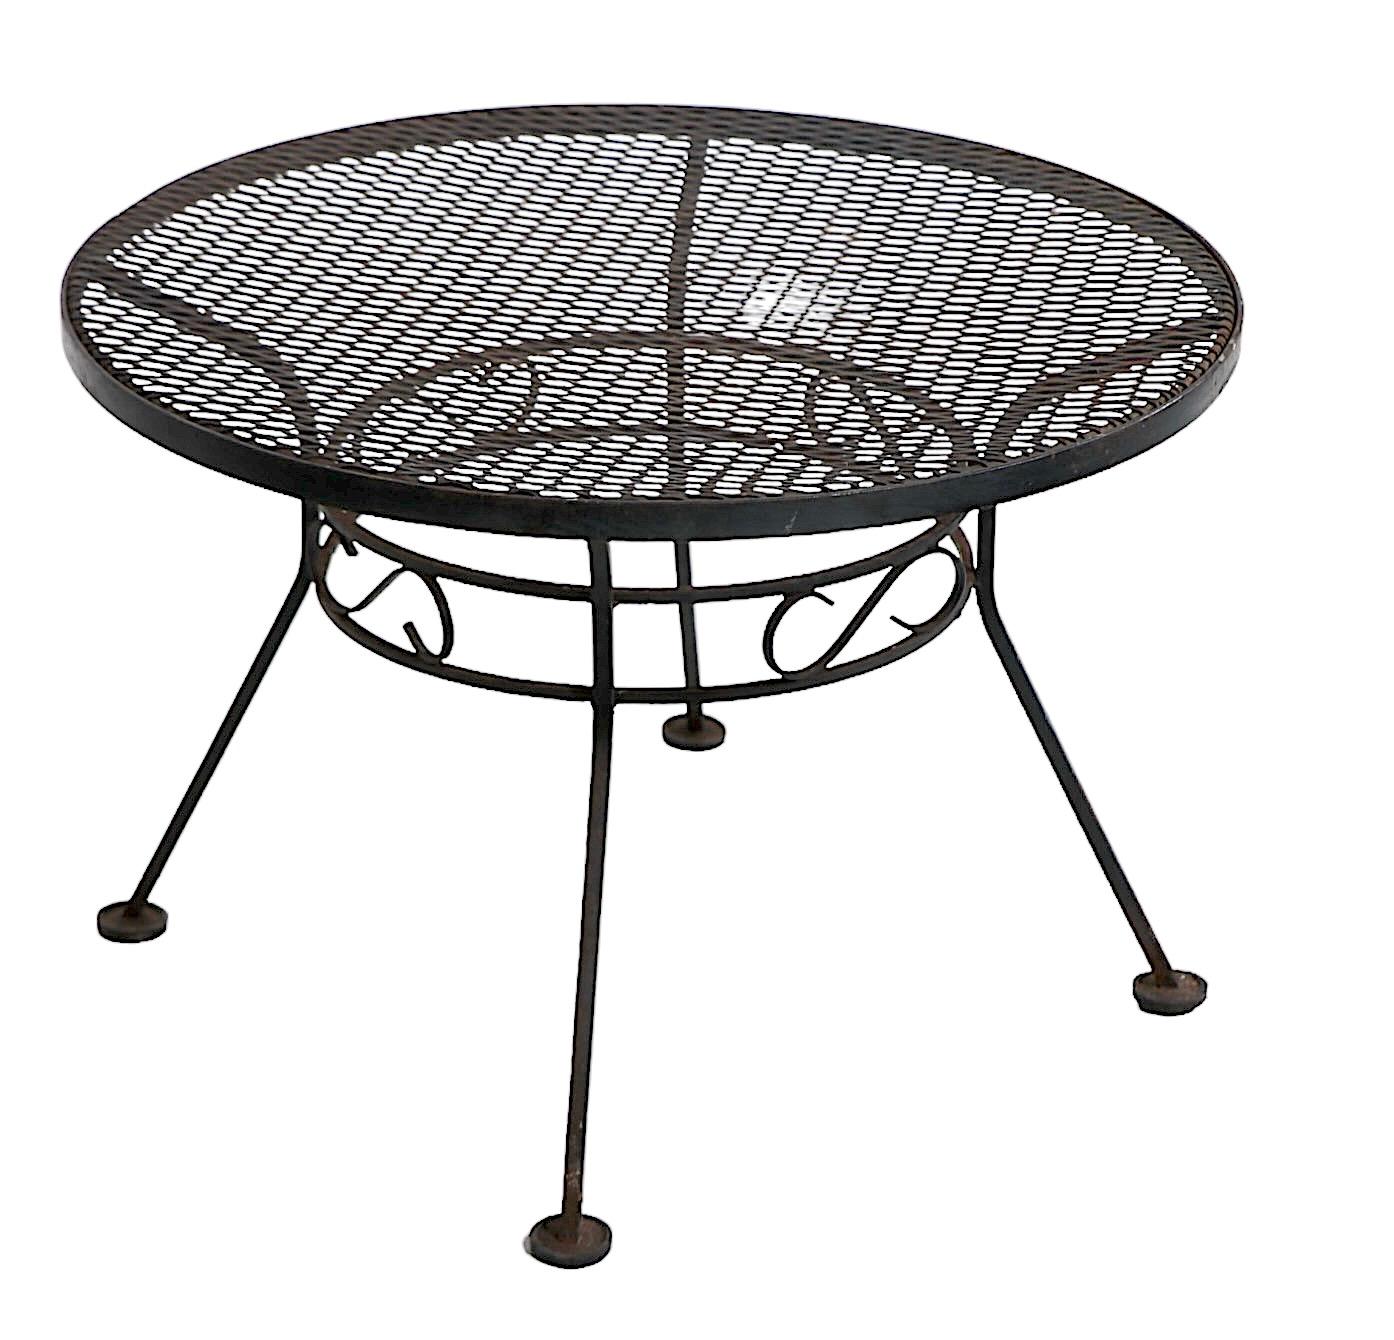 American  Small Wrought Iron  Garden Patio Poolside Table by Woodard c. 1940/60's For Sale